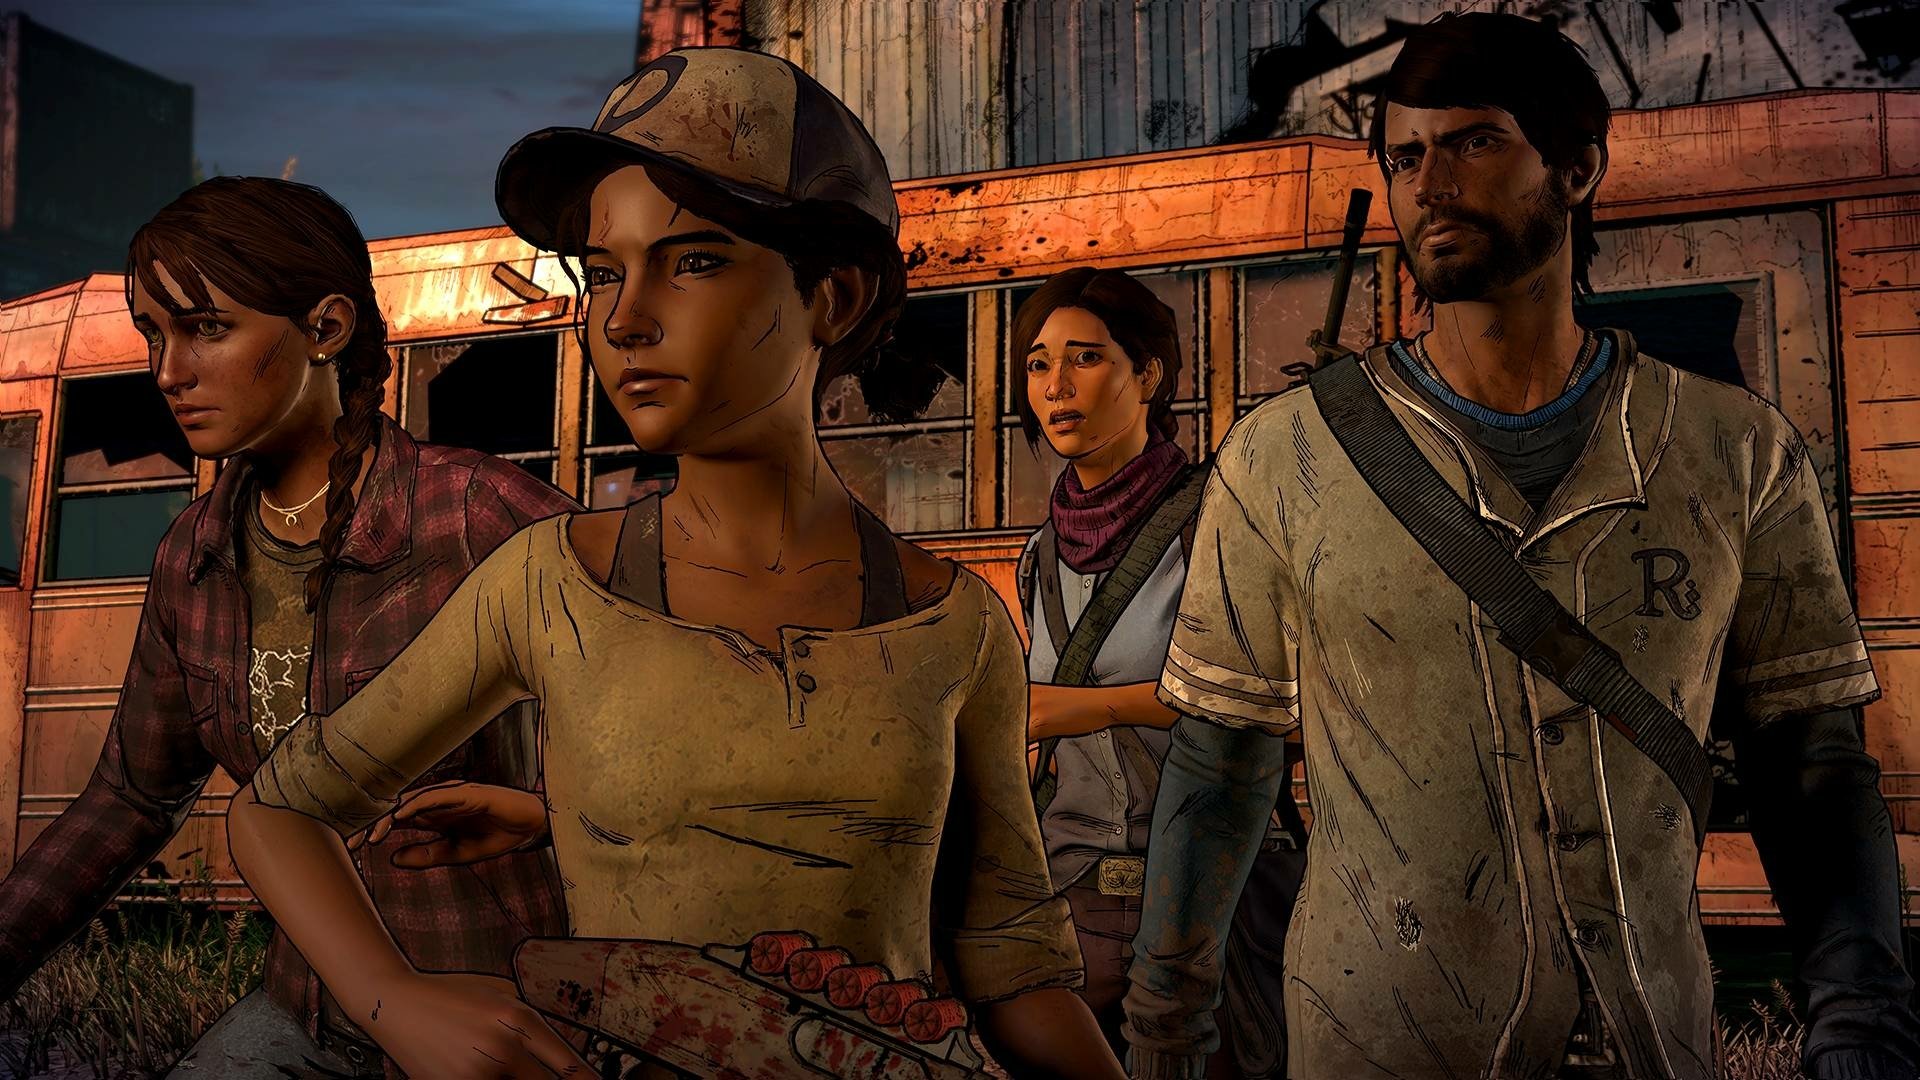 50 Clementine The Walking Dead Hd Wallpapers Background Images